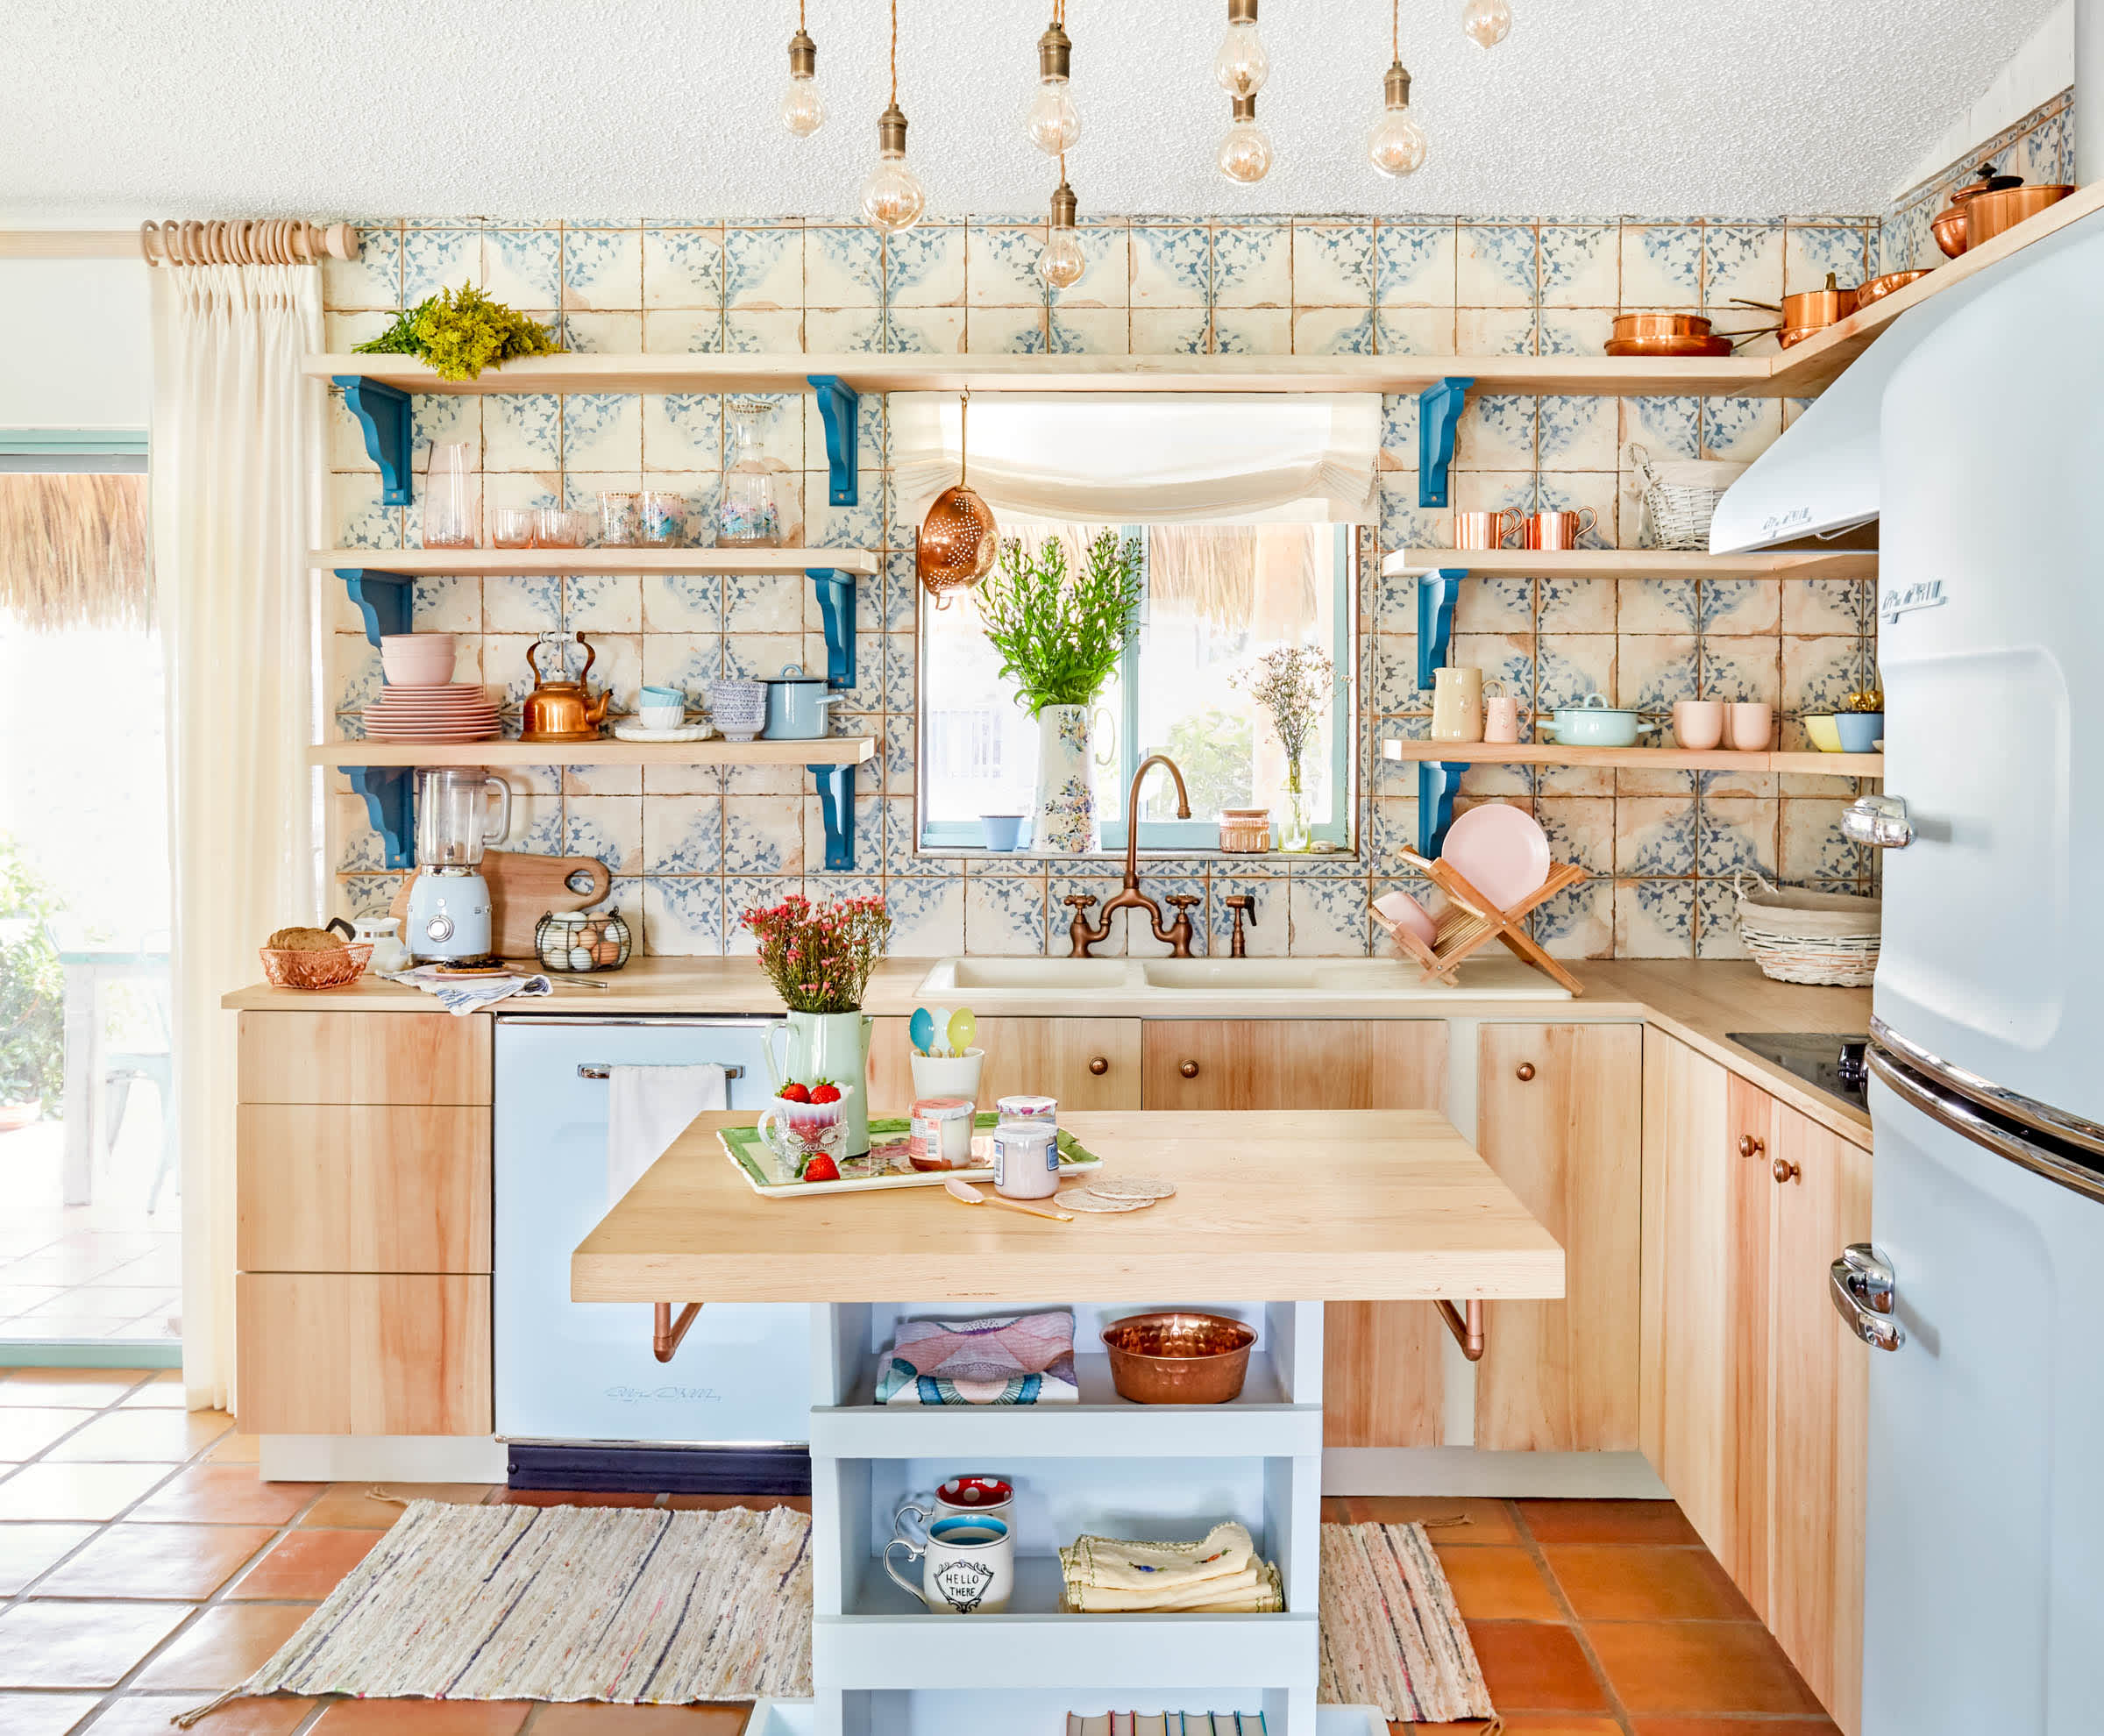 12 Country Kitchen Ideas - How to Give a Rustic Style to Your Kitchen | Apartment Therapy